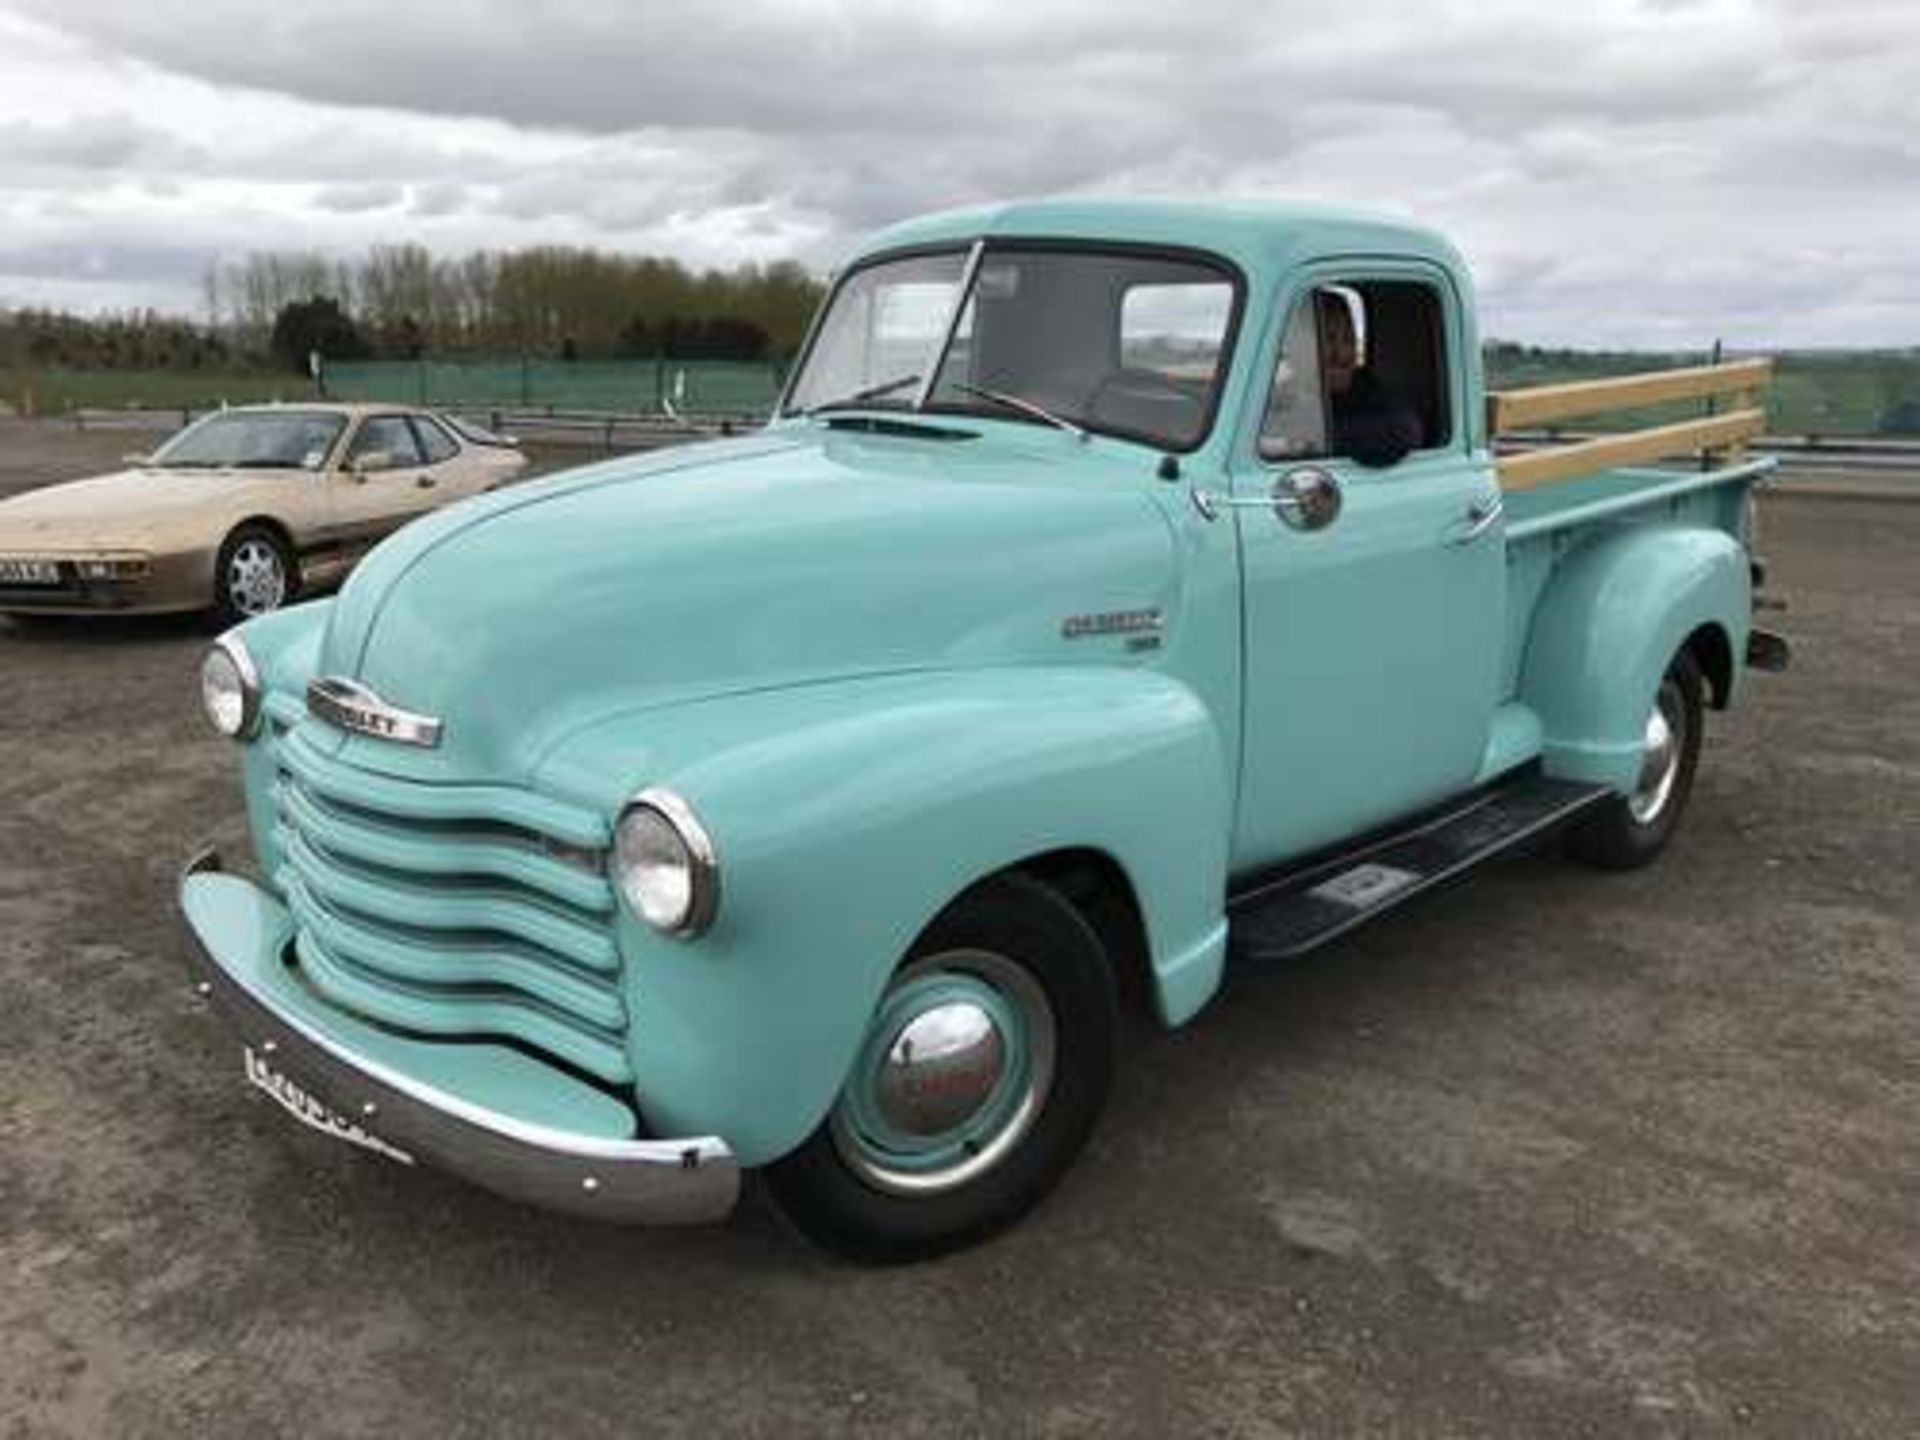 CHEVROLET 3100 PICK UP - 3500cc - Image 7 of 16